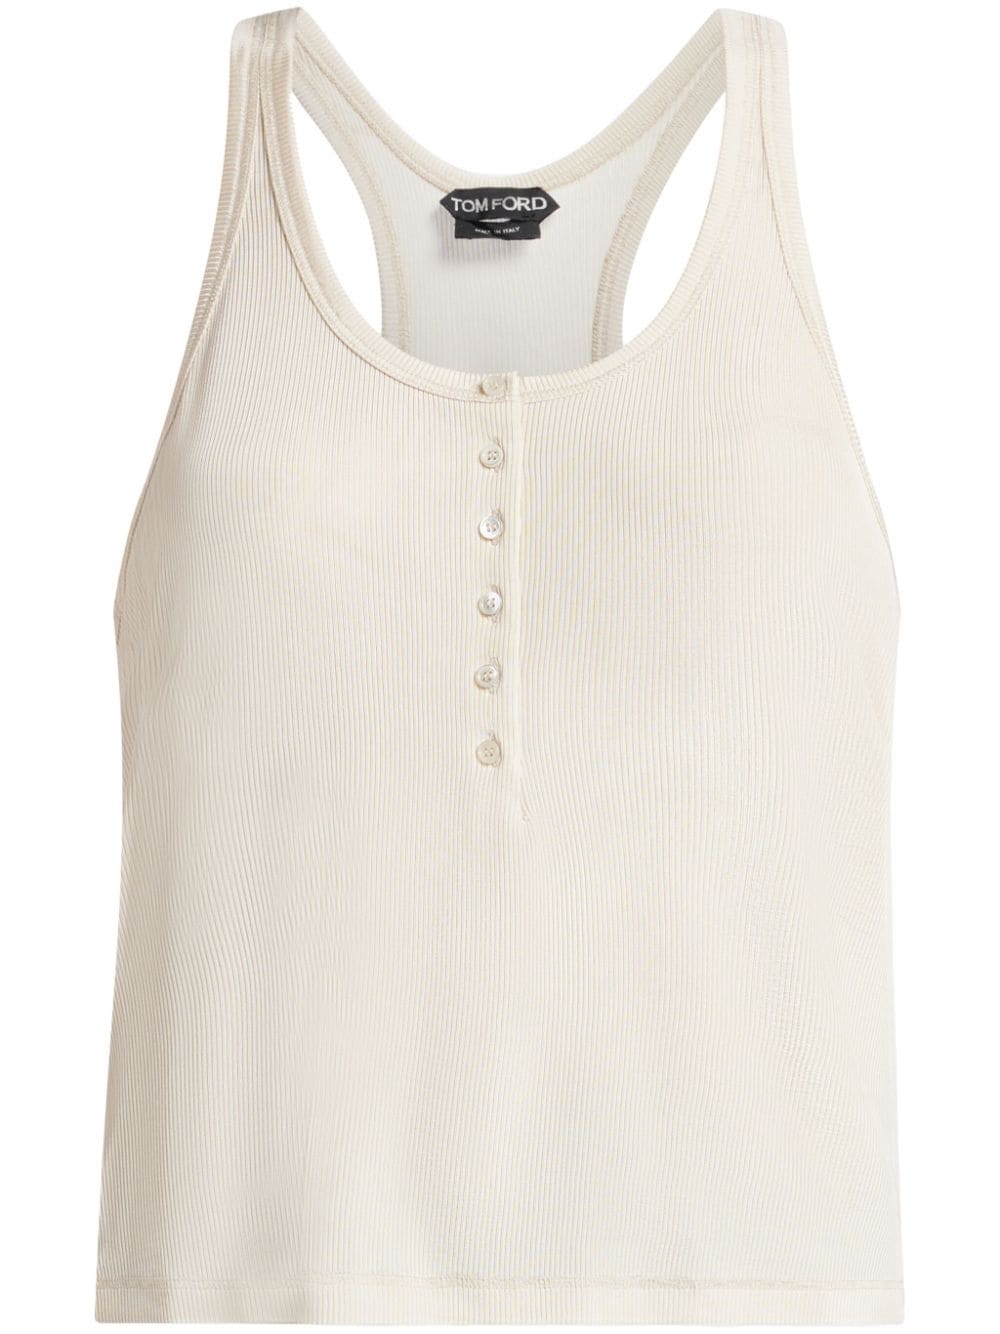 TOM FORD ribbed jersey tank top - White von TOM FORD